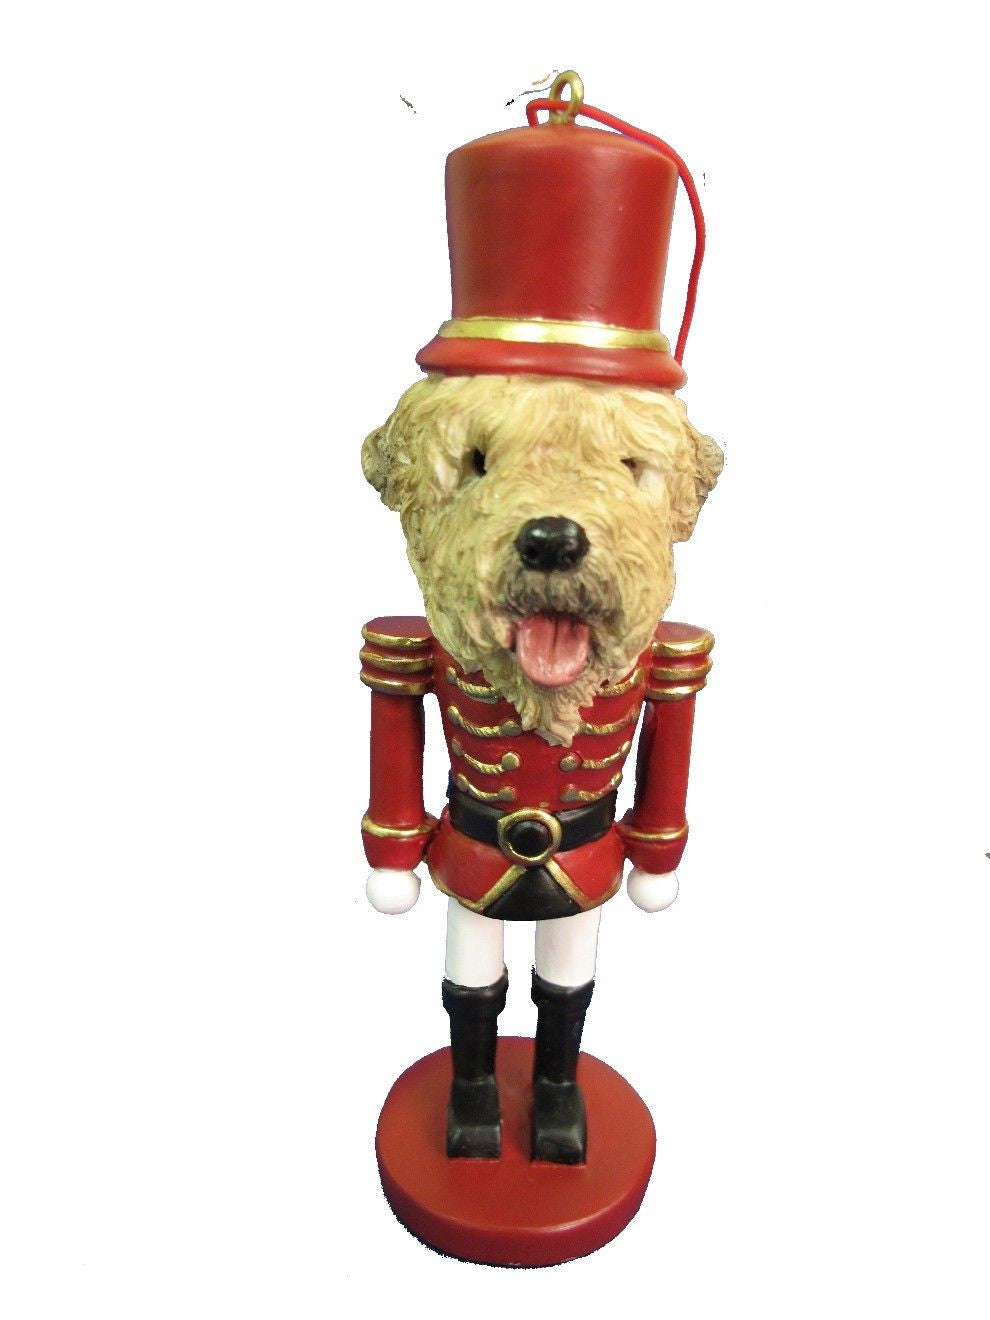 Soft Coated Wheaten Terrier Dog Toy Soldier Nutcracker Christmas Ornament